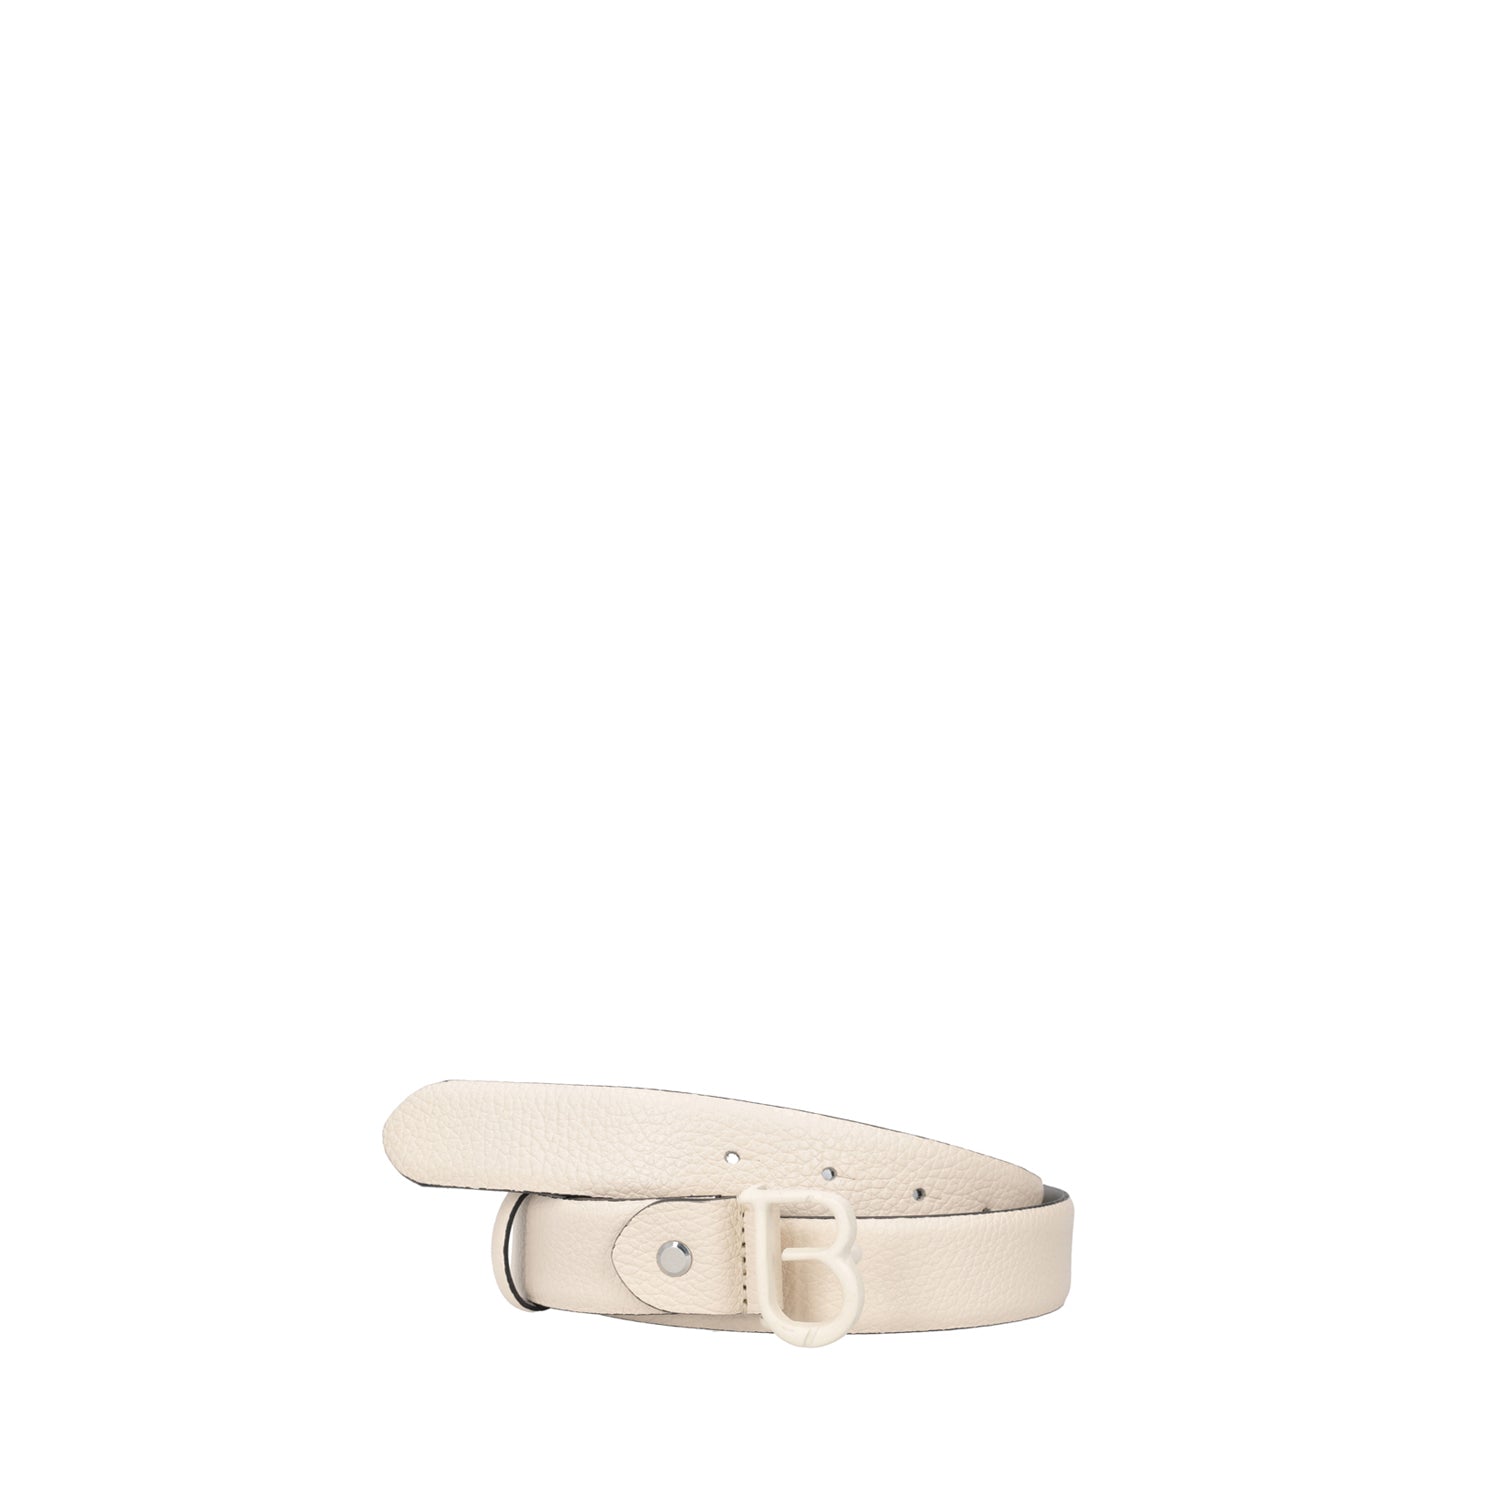 NATURAL ITALIAN MADE BELT IN LEATHER